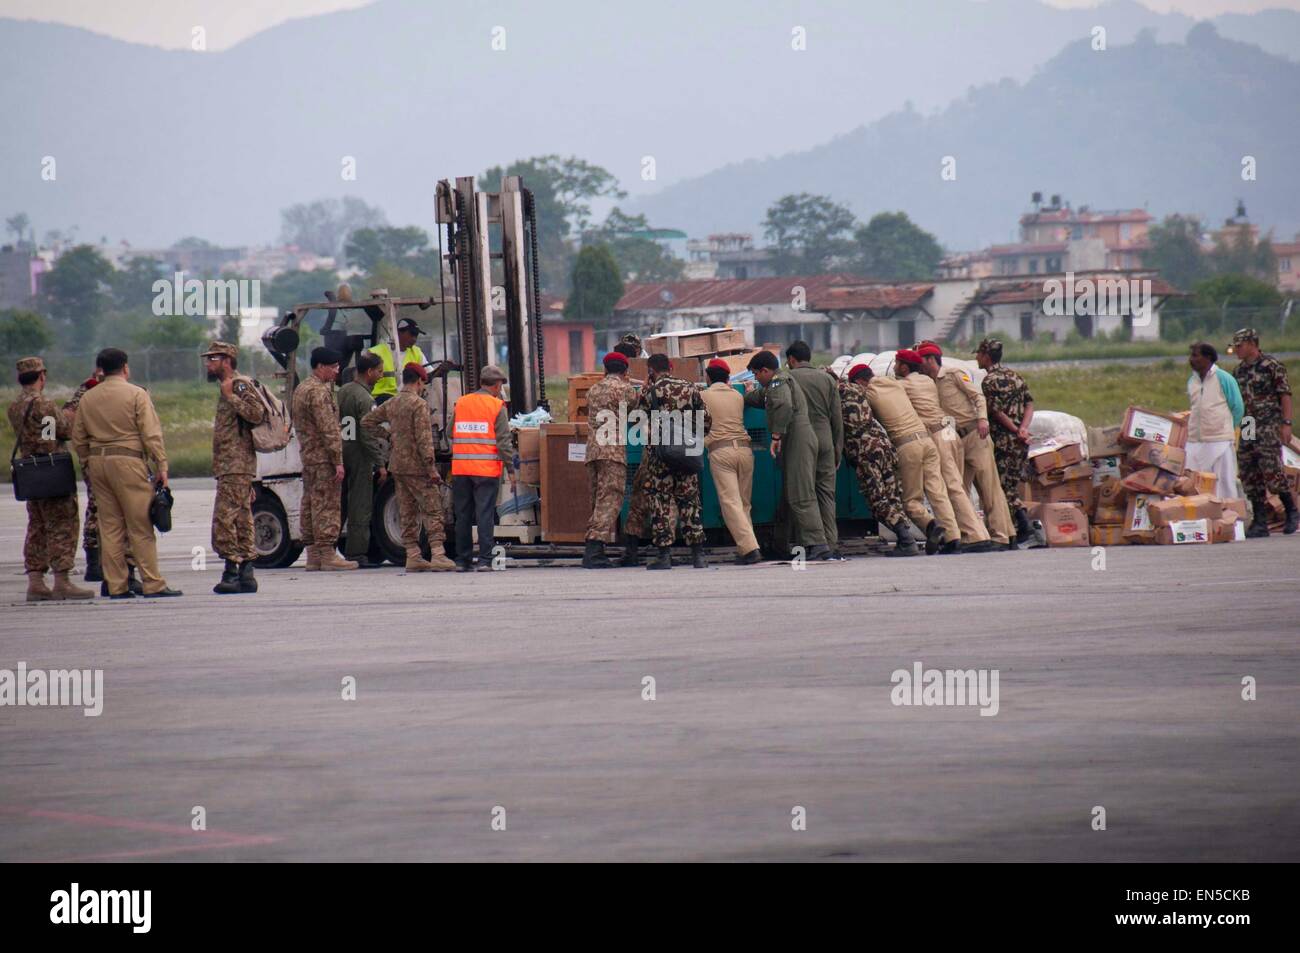 Kathmandu, Nepal. 28th Apr, 2015. International rescue teams arrive at Tribhuvan International Airport in Kathmandu, Nepal, April 28, 2015. The death toll from a powerful earthquake in Nepal soared to 4,555 and a total of 8,299 others were injured, the Nepal Police said. Various international rescue teams performed relief operations in affected regions. Credit:  Pratap Thapa/Xinhua/Alamy Live News Stock Photo